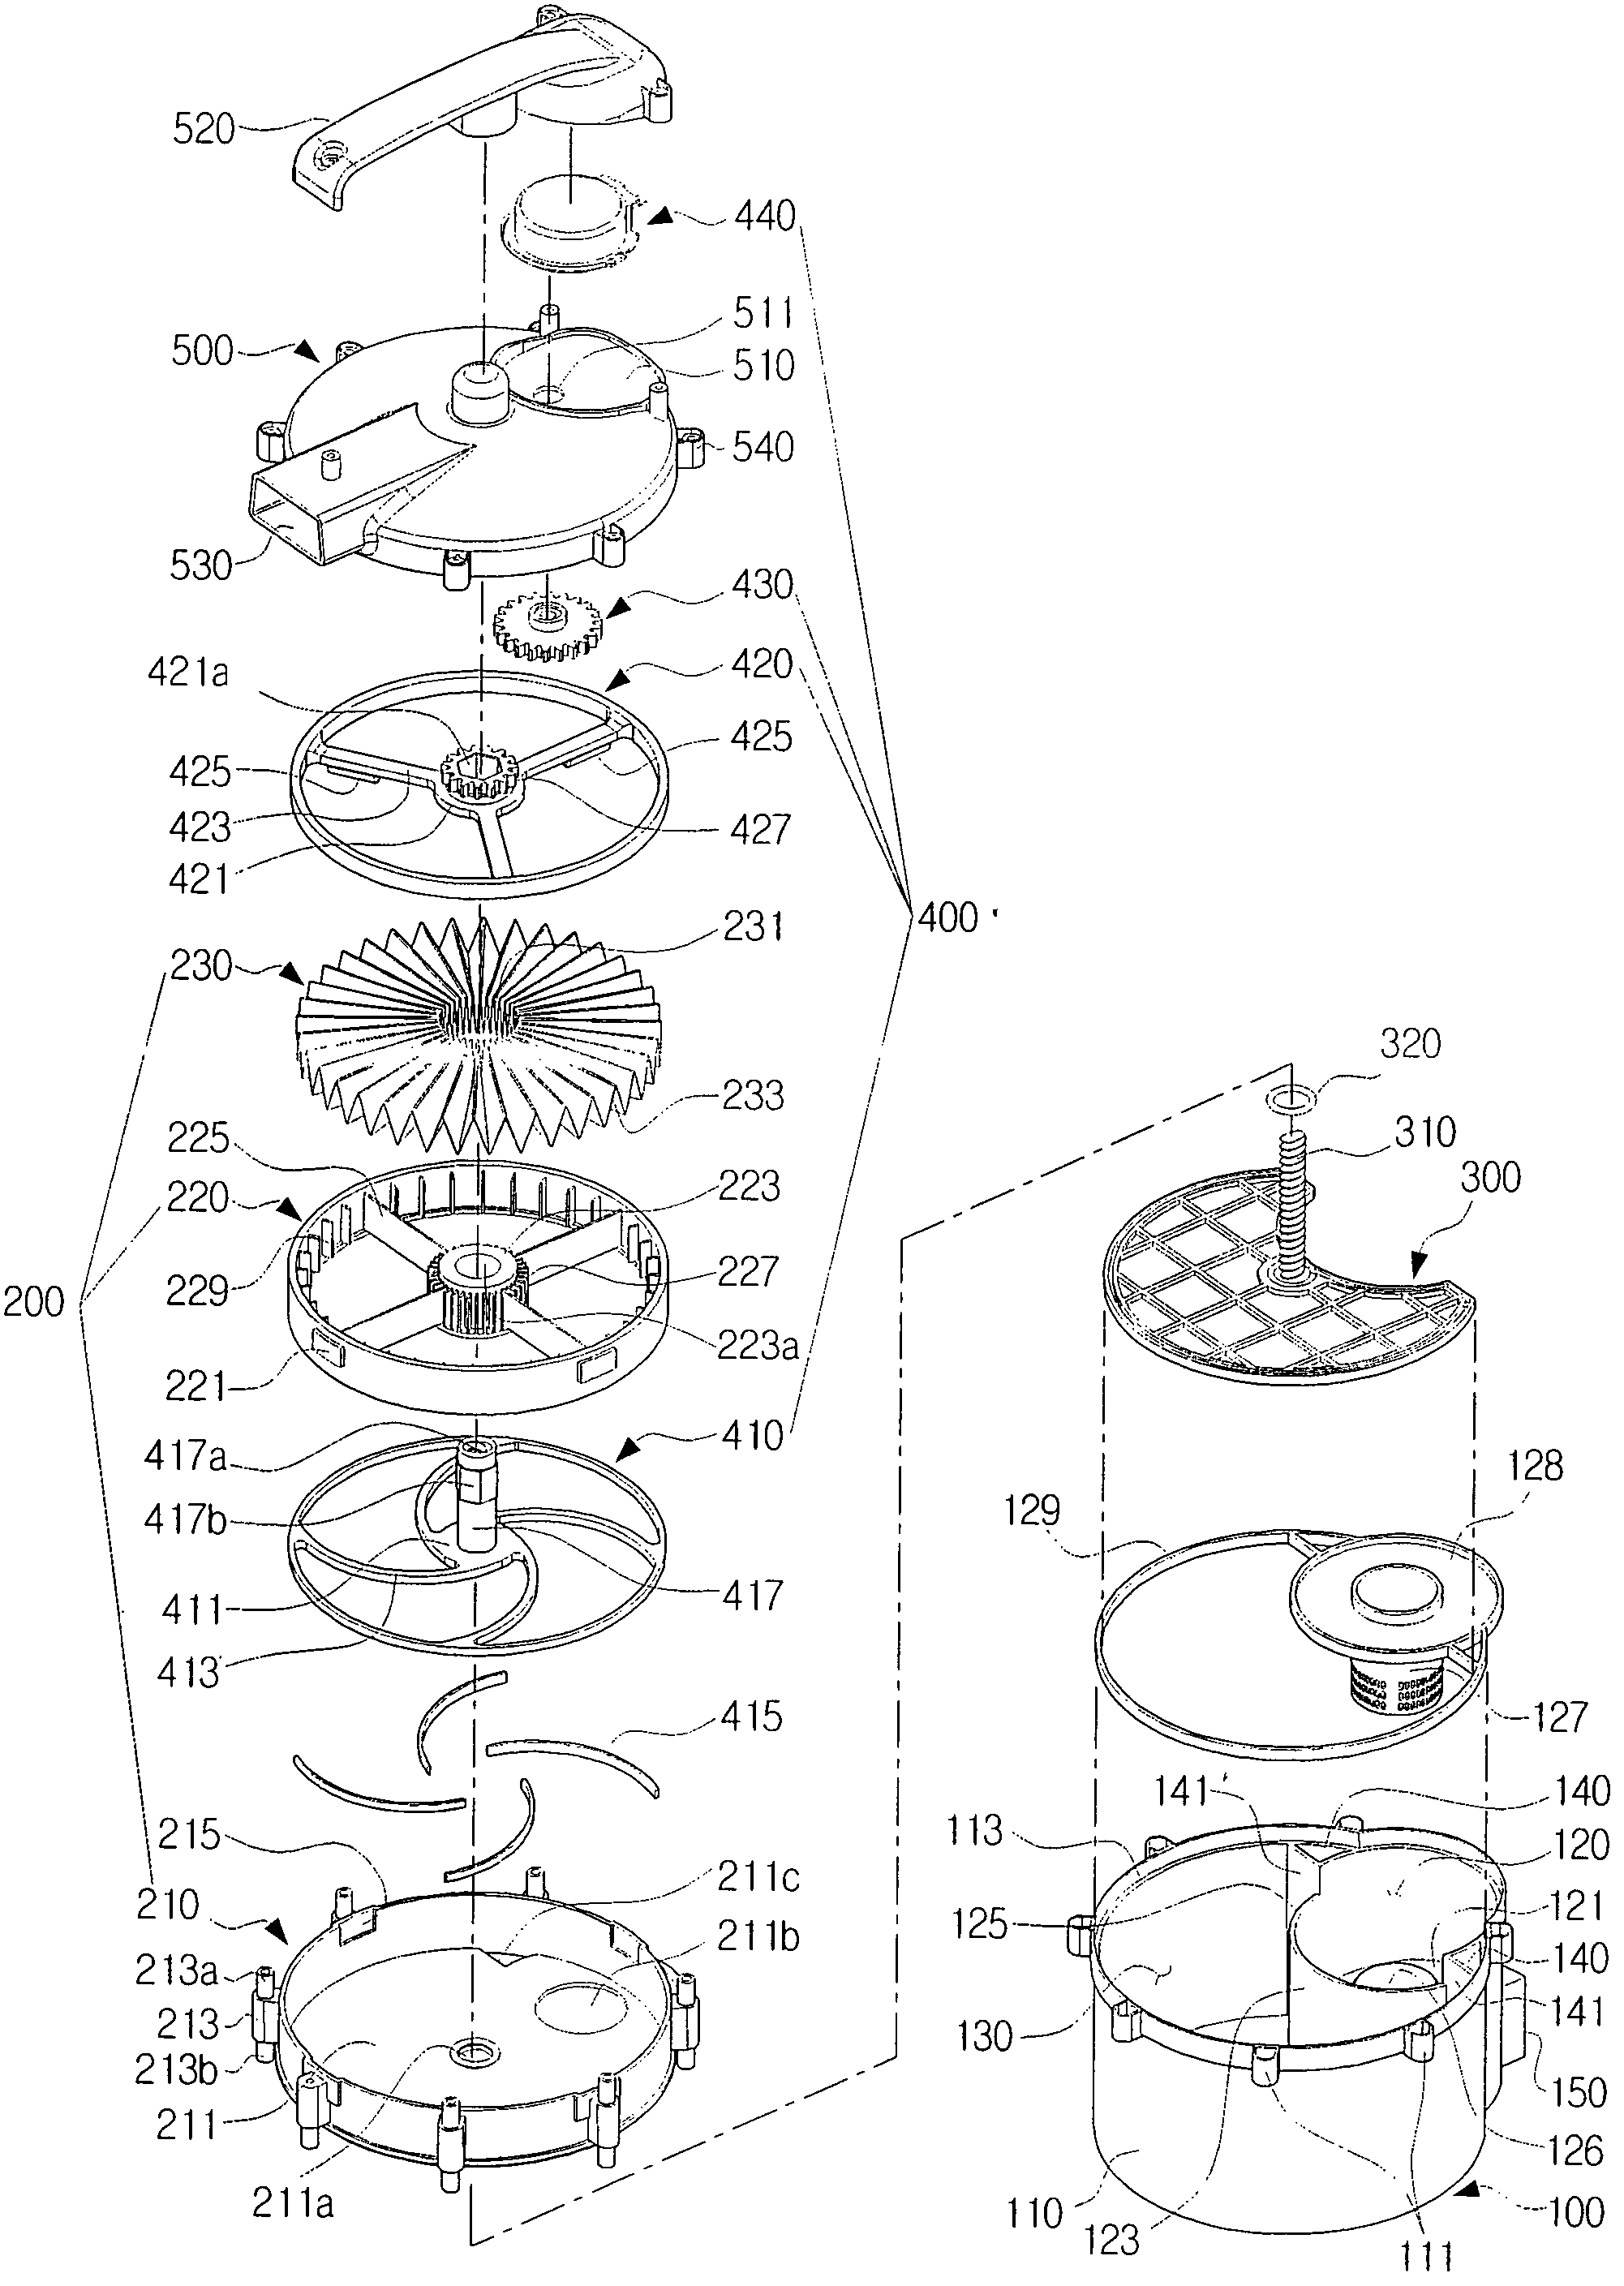 Dust collecting apparatus with combined compacting and filter cleaning for a vacuum cleaner